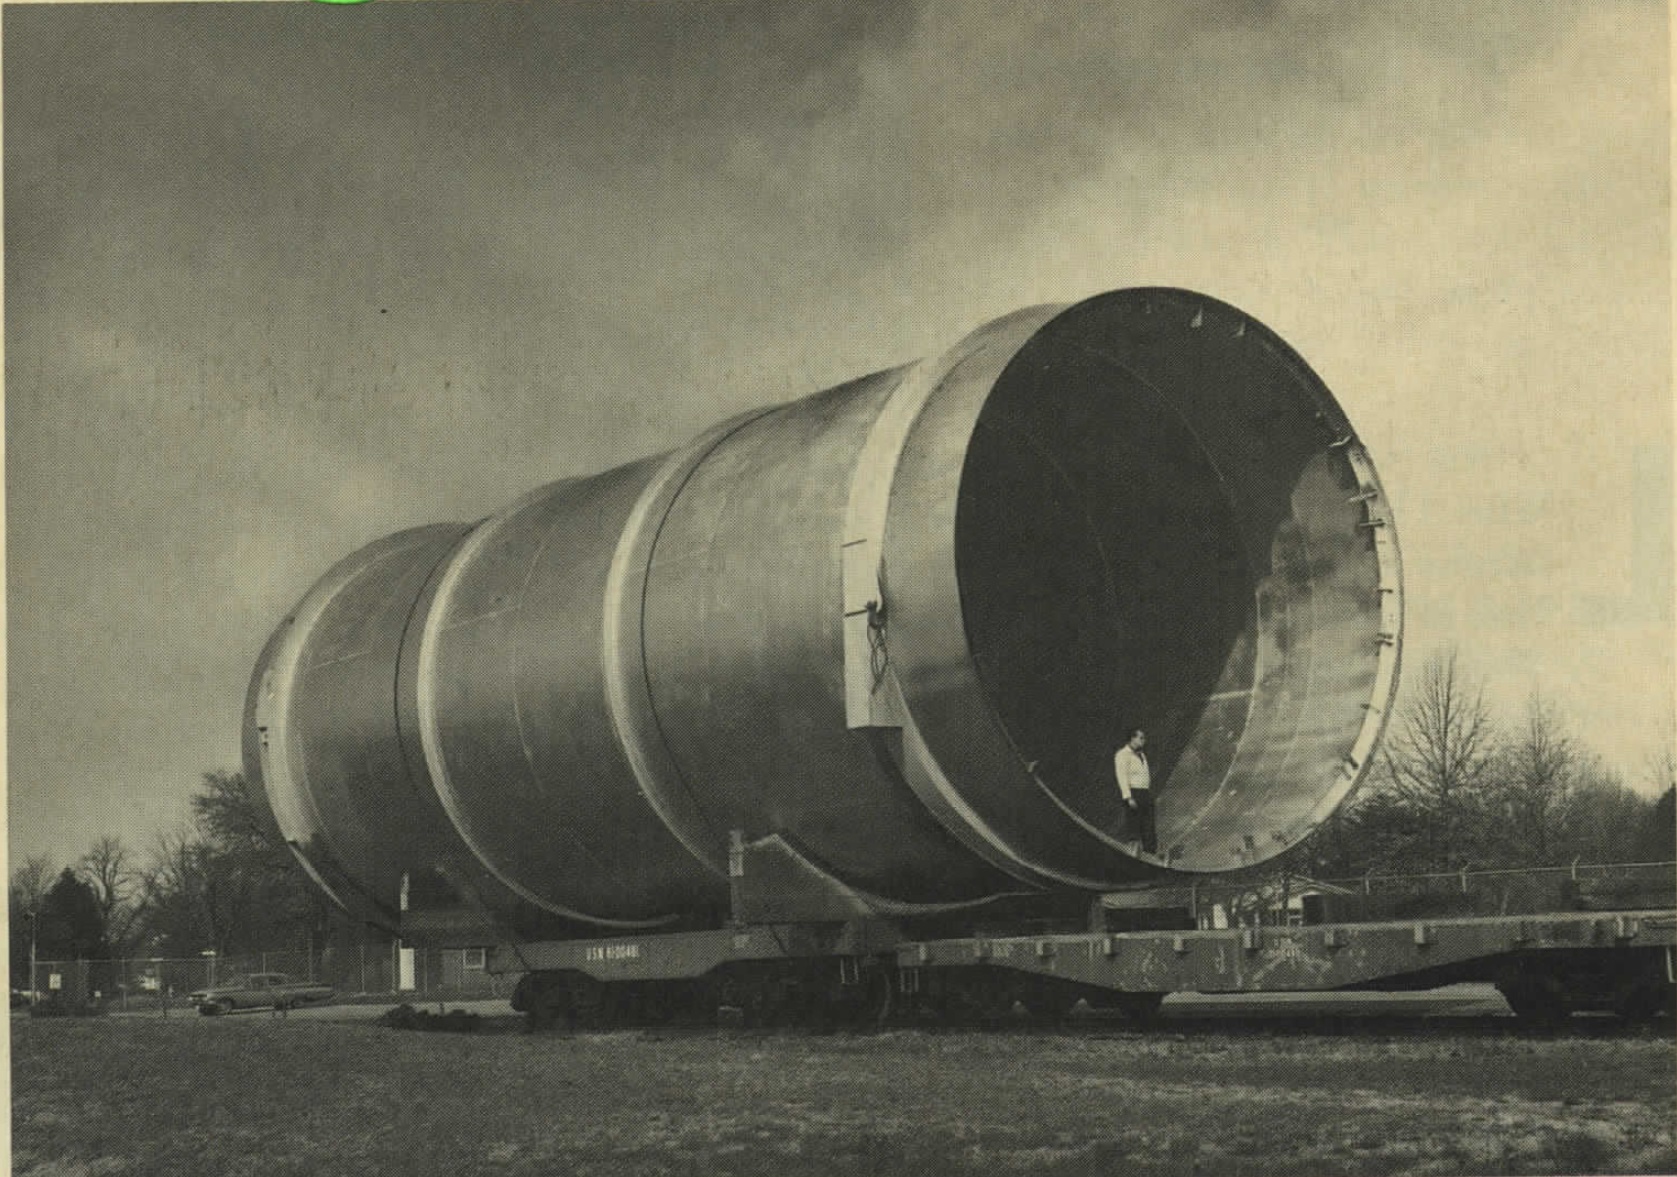 A man stands in the muzzle of the conical shock tube during construction, c. 1967